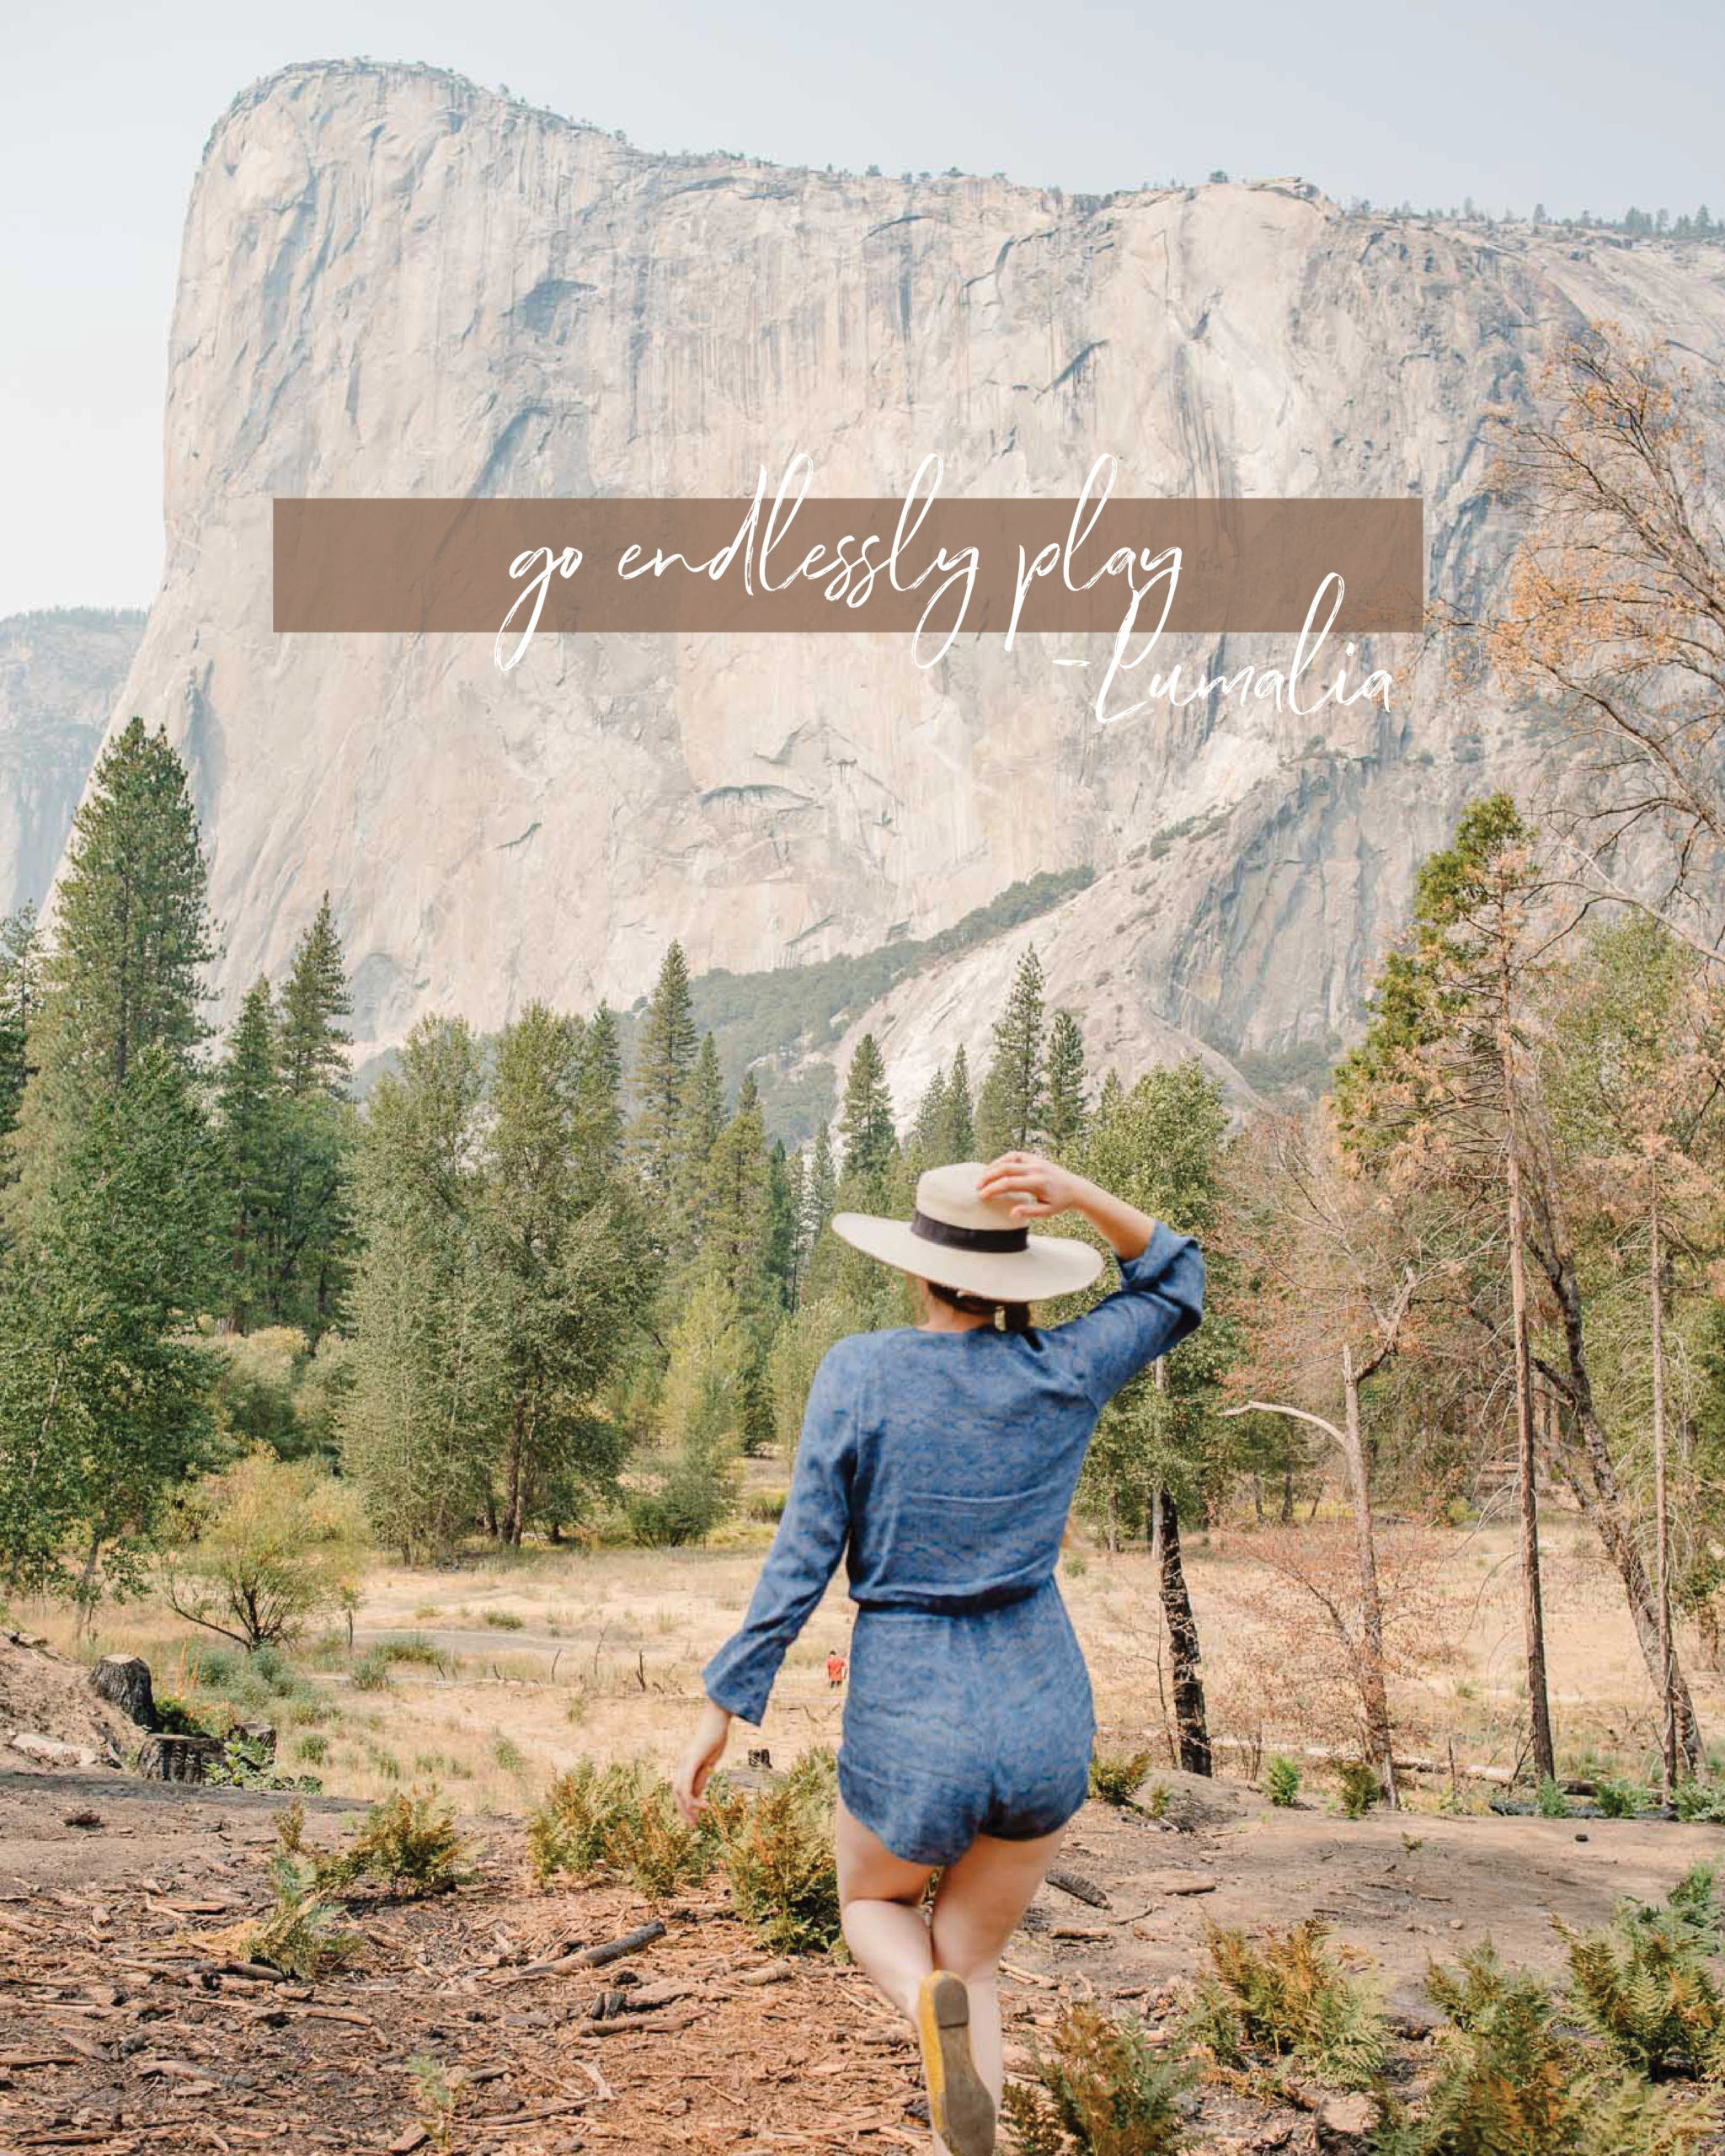 "go endlessly play" Lumalia photo of girl in blue romper with yellow shoes with sun hat running toward rock face and trees in the background